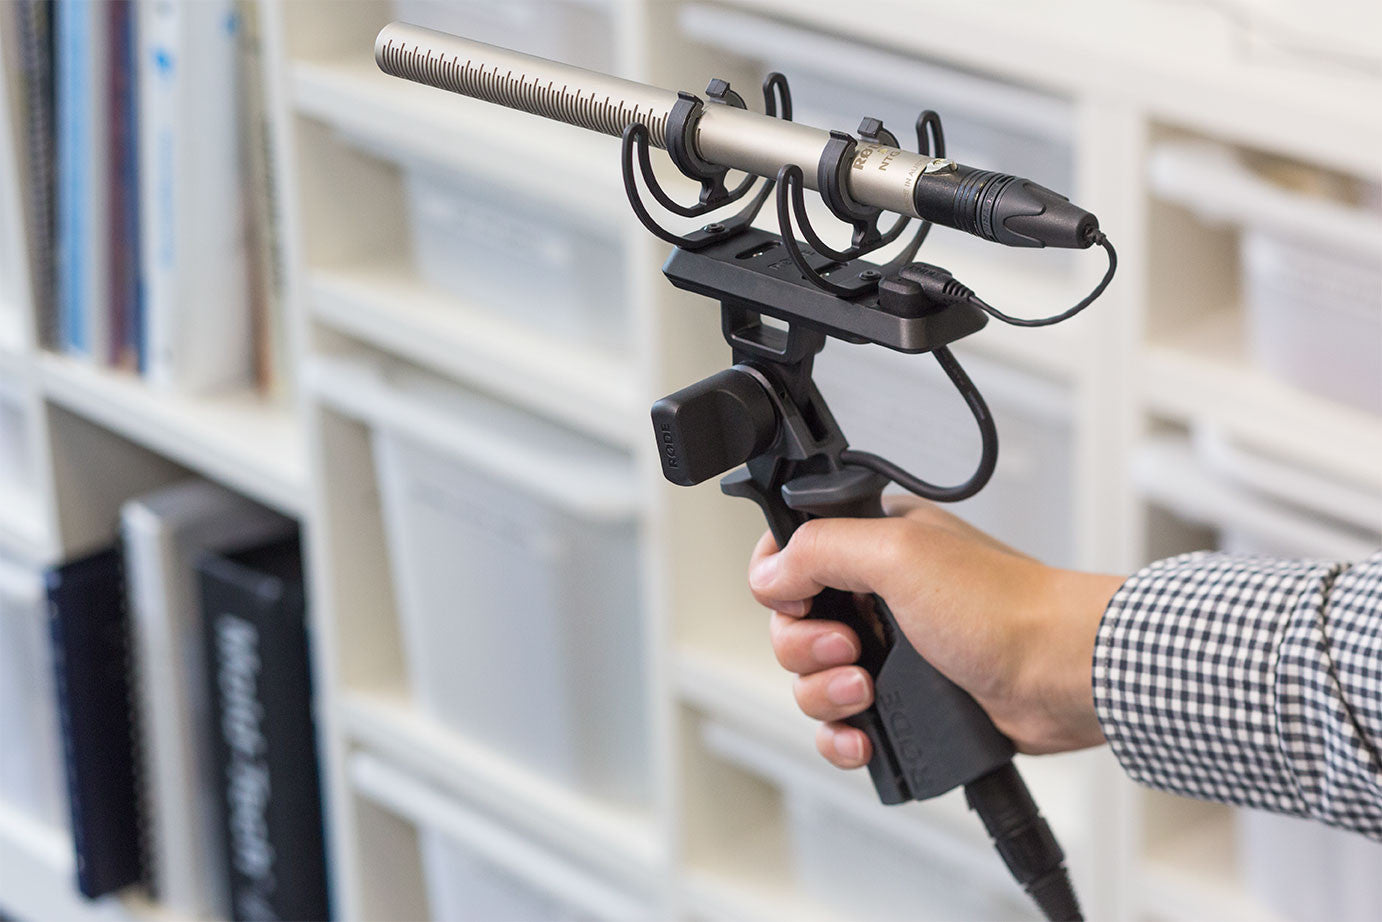 RODE PG2 Rycote Lyre Shock Mounted Pistol Grip, video audio microphones & recorders, RODE - Pictureline  - 2